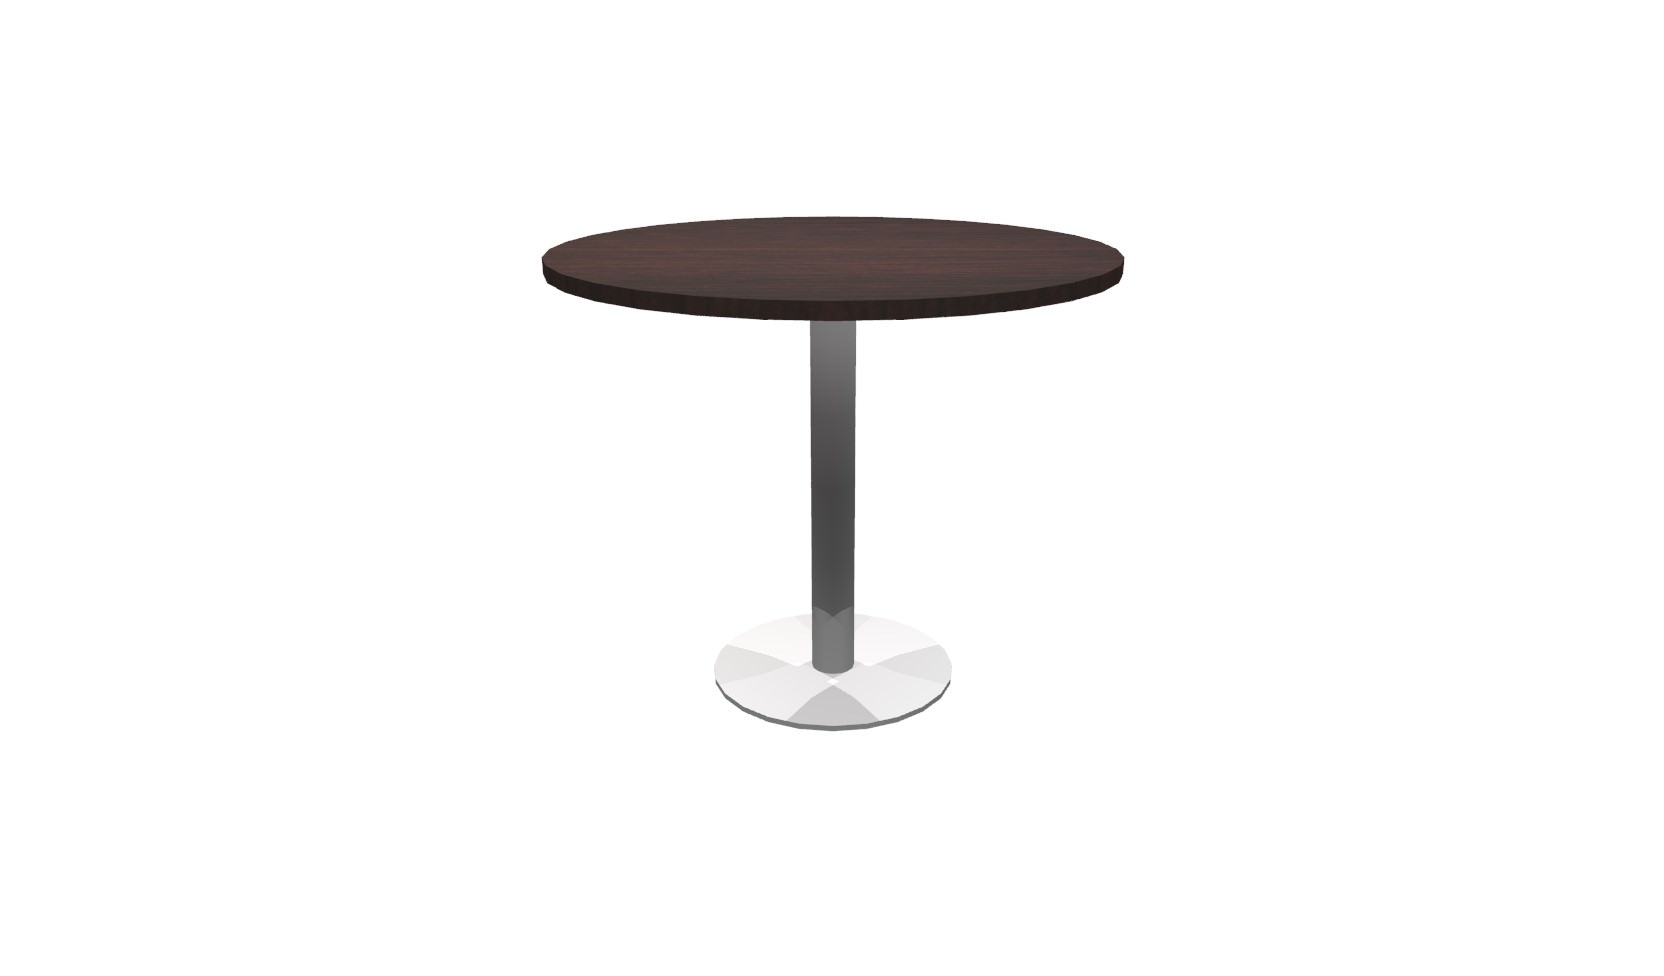 36 Inch Round Conference Table - (Espresso / Brushed Metal)